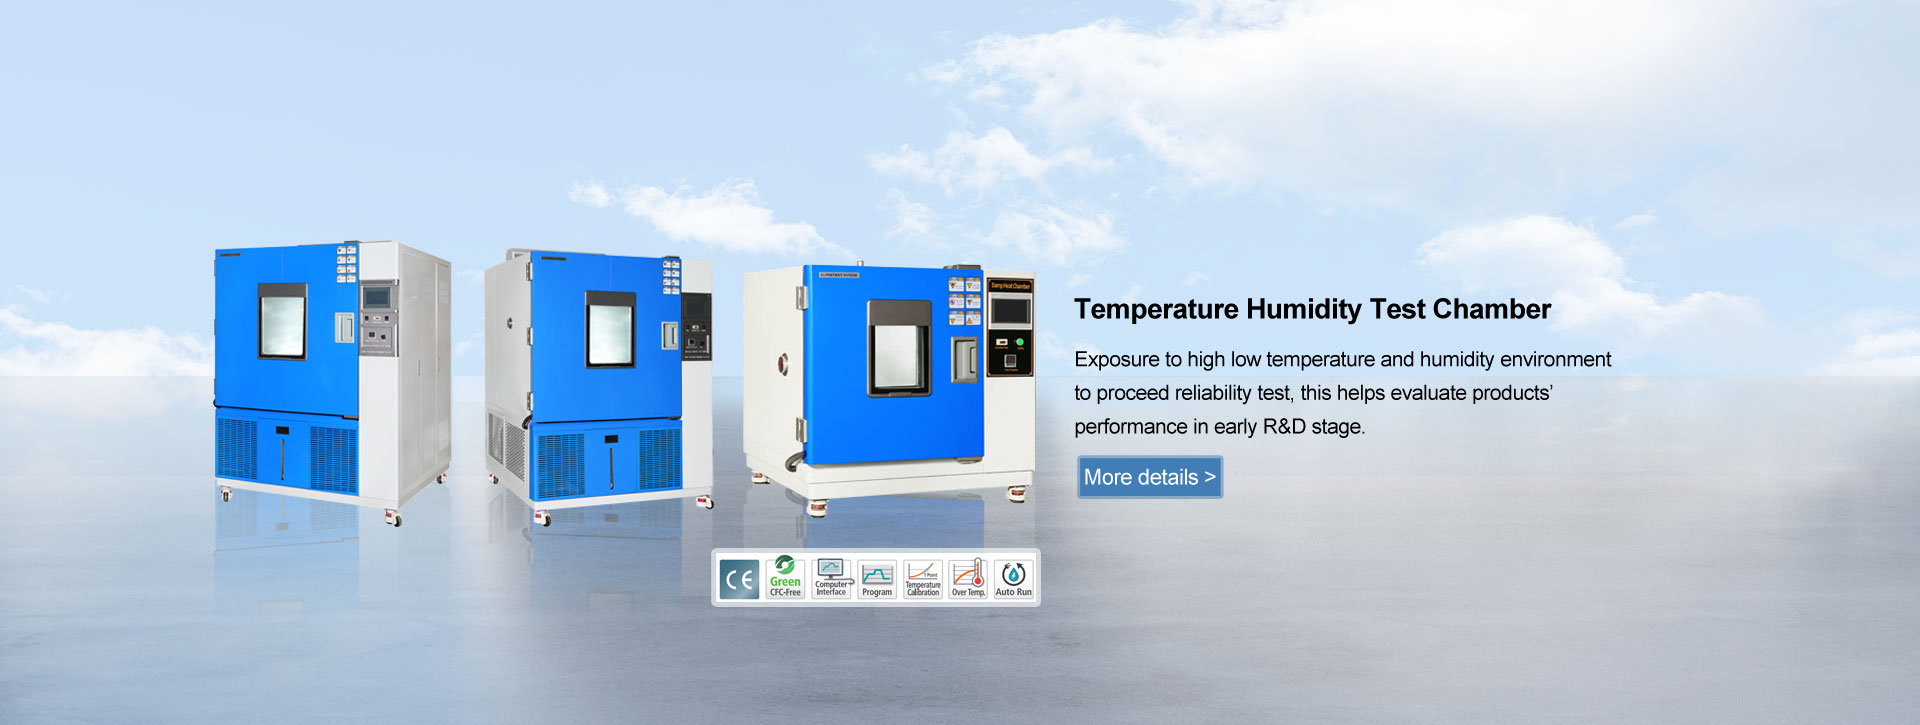 Temperature Humidity Test Chamber Manufacturers